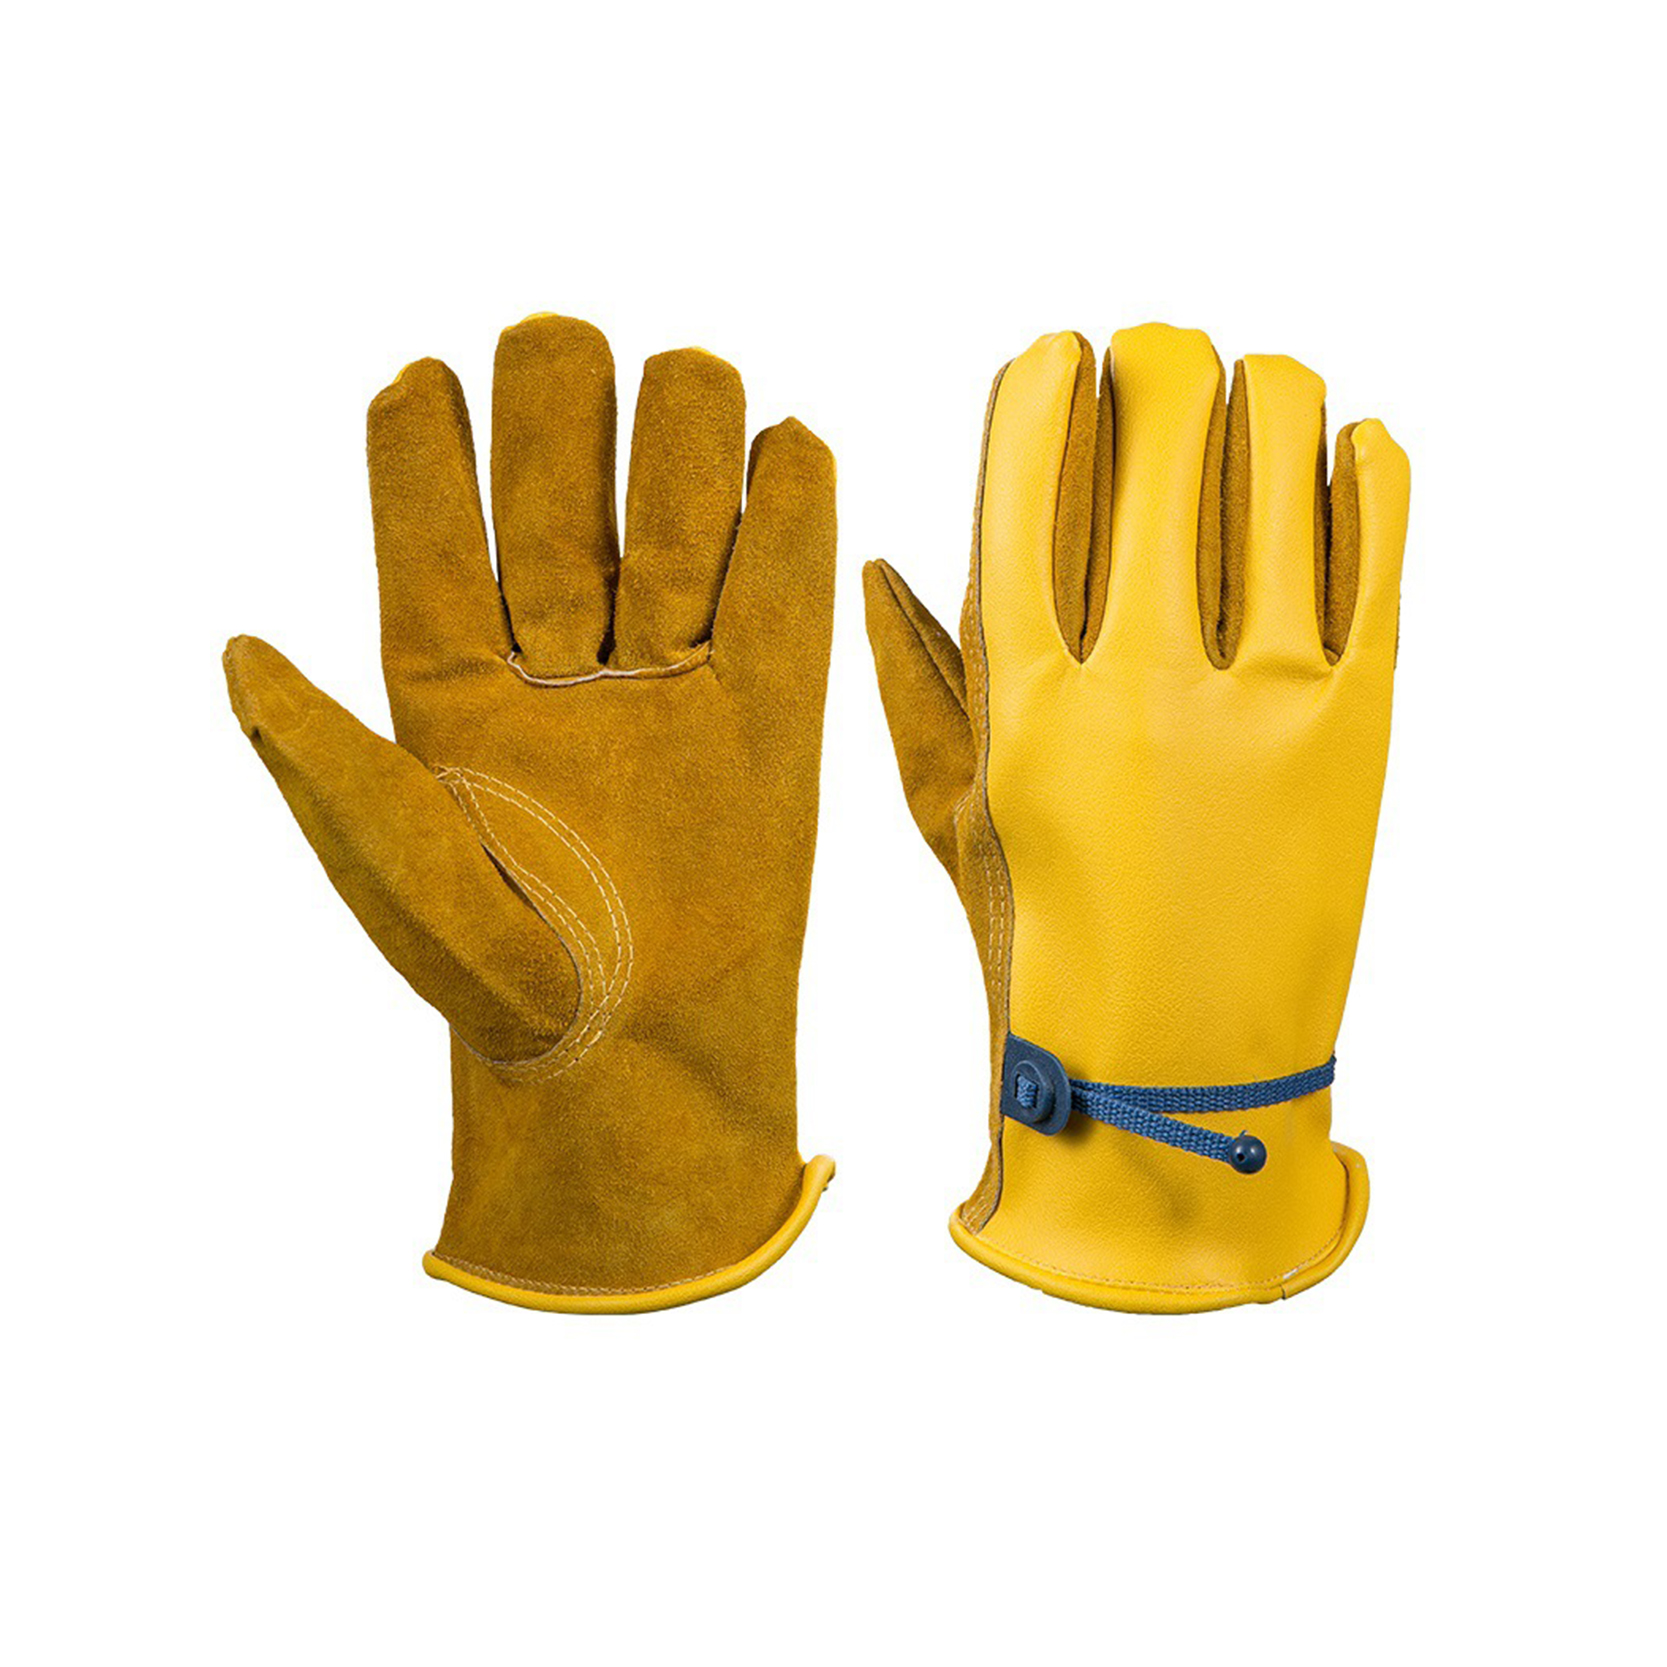 Custom Leather Work Gloves Cowhide Gloves Gardening Flower Trimming Motorcycle Driving Safety Welding Gloves Featured Image